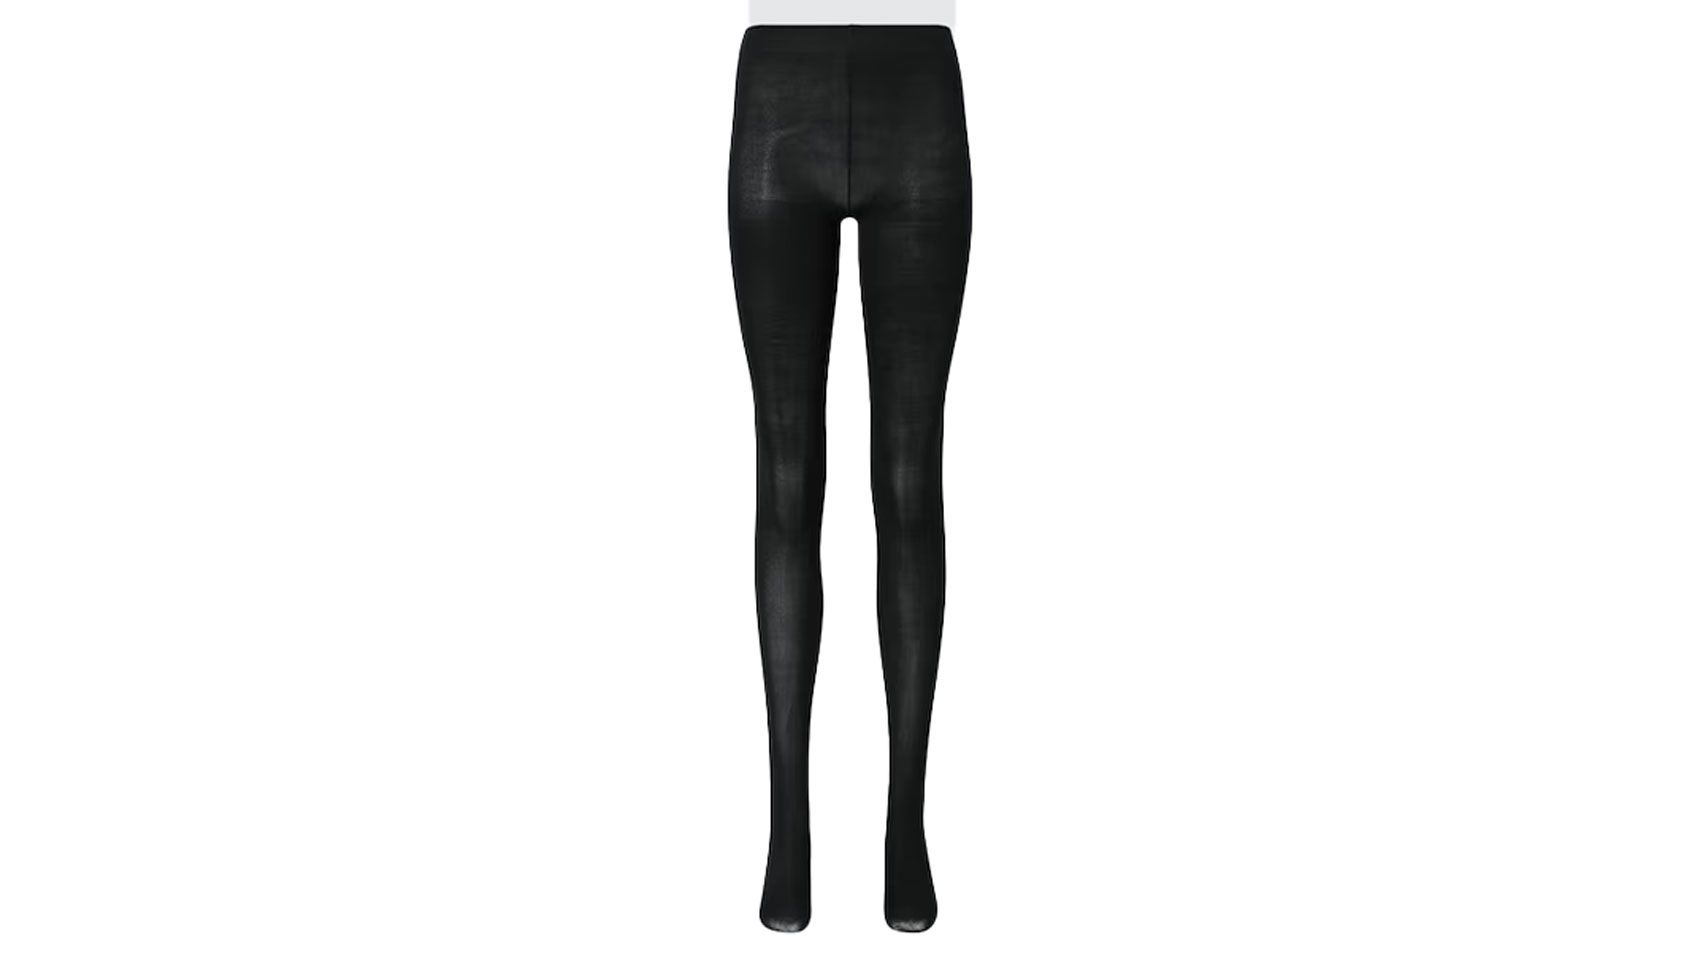 Stay Warm and Stylish with UNIQLO Women's Glitter Tights